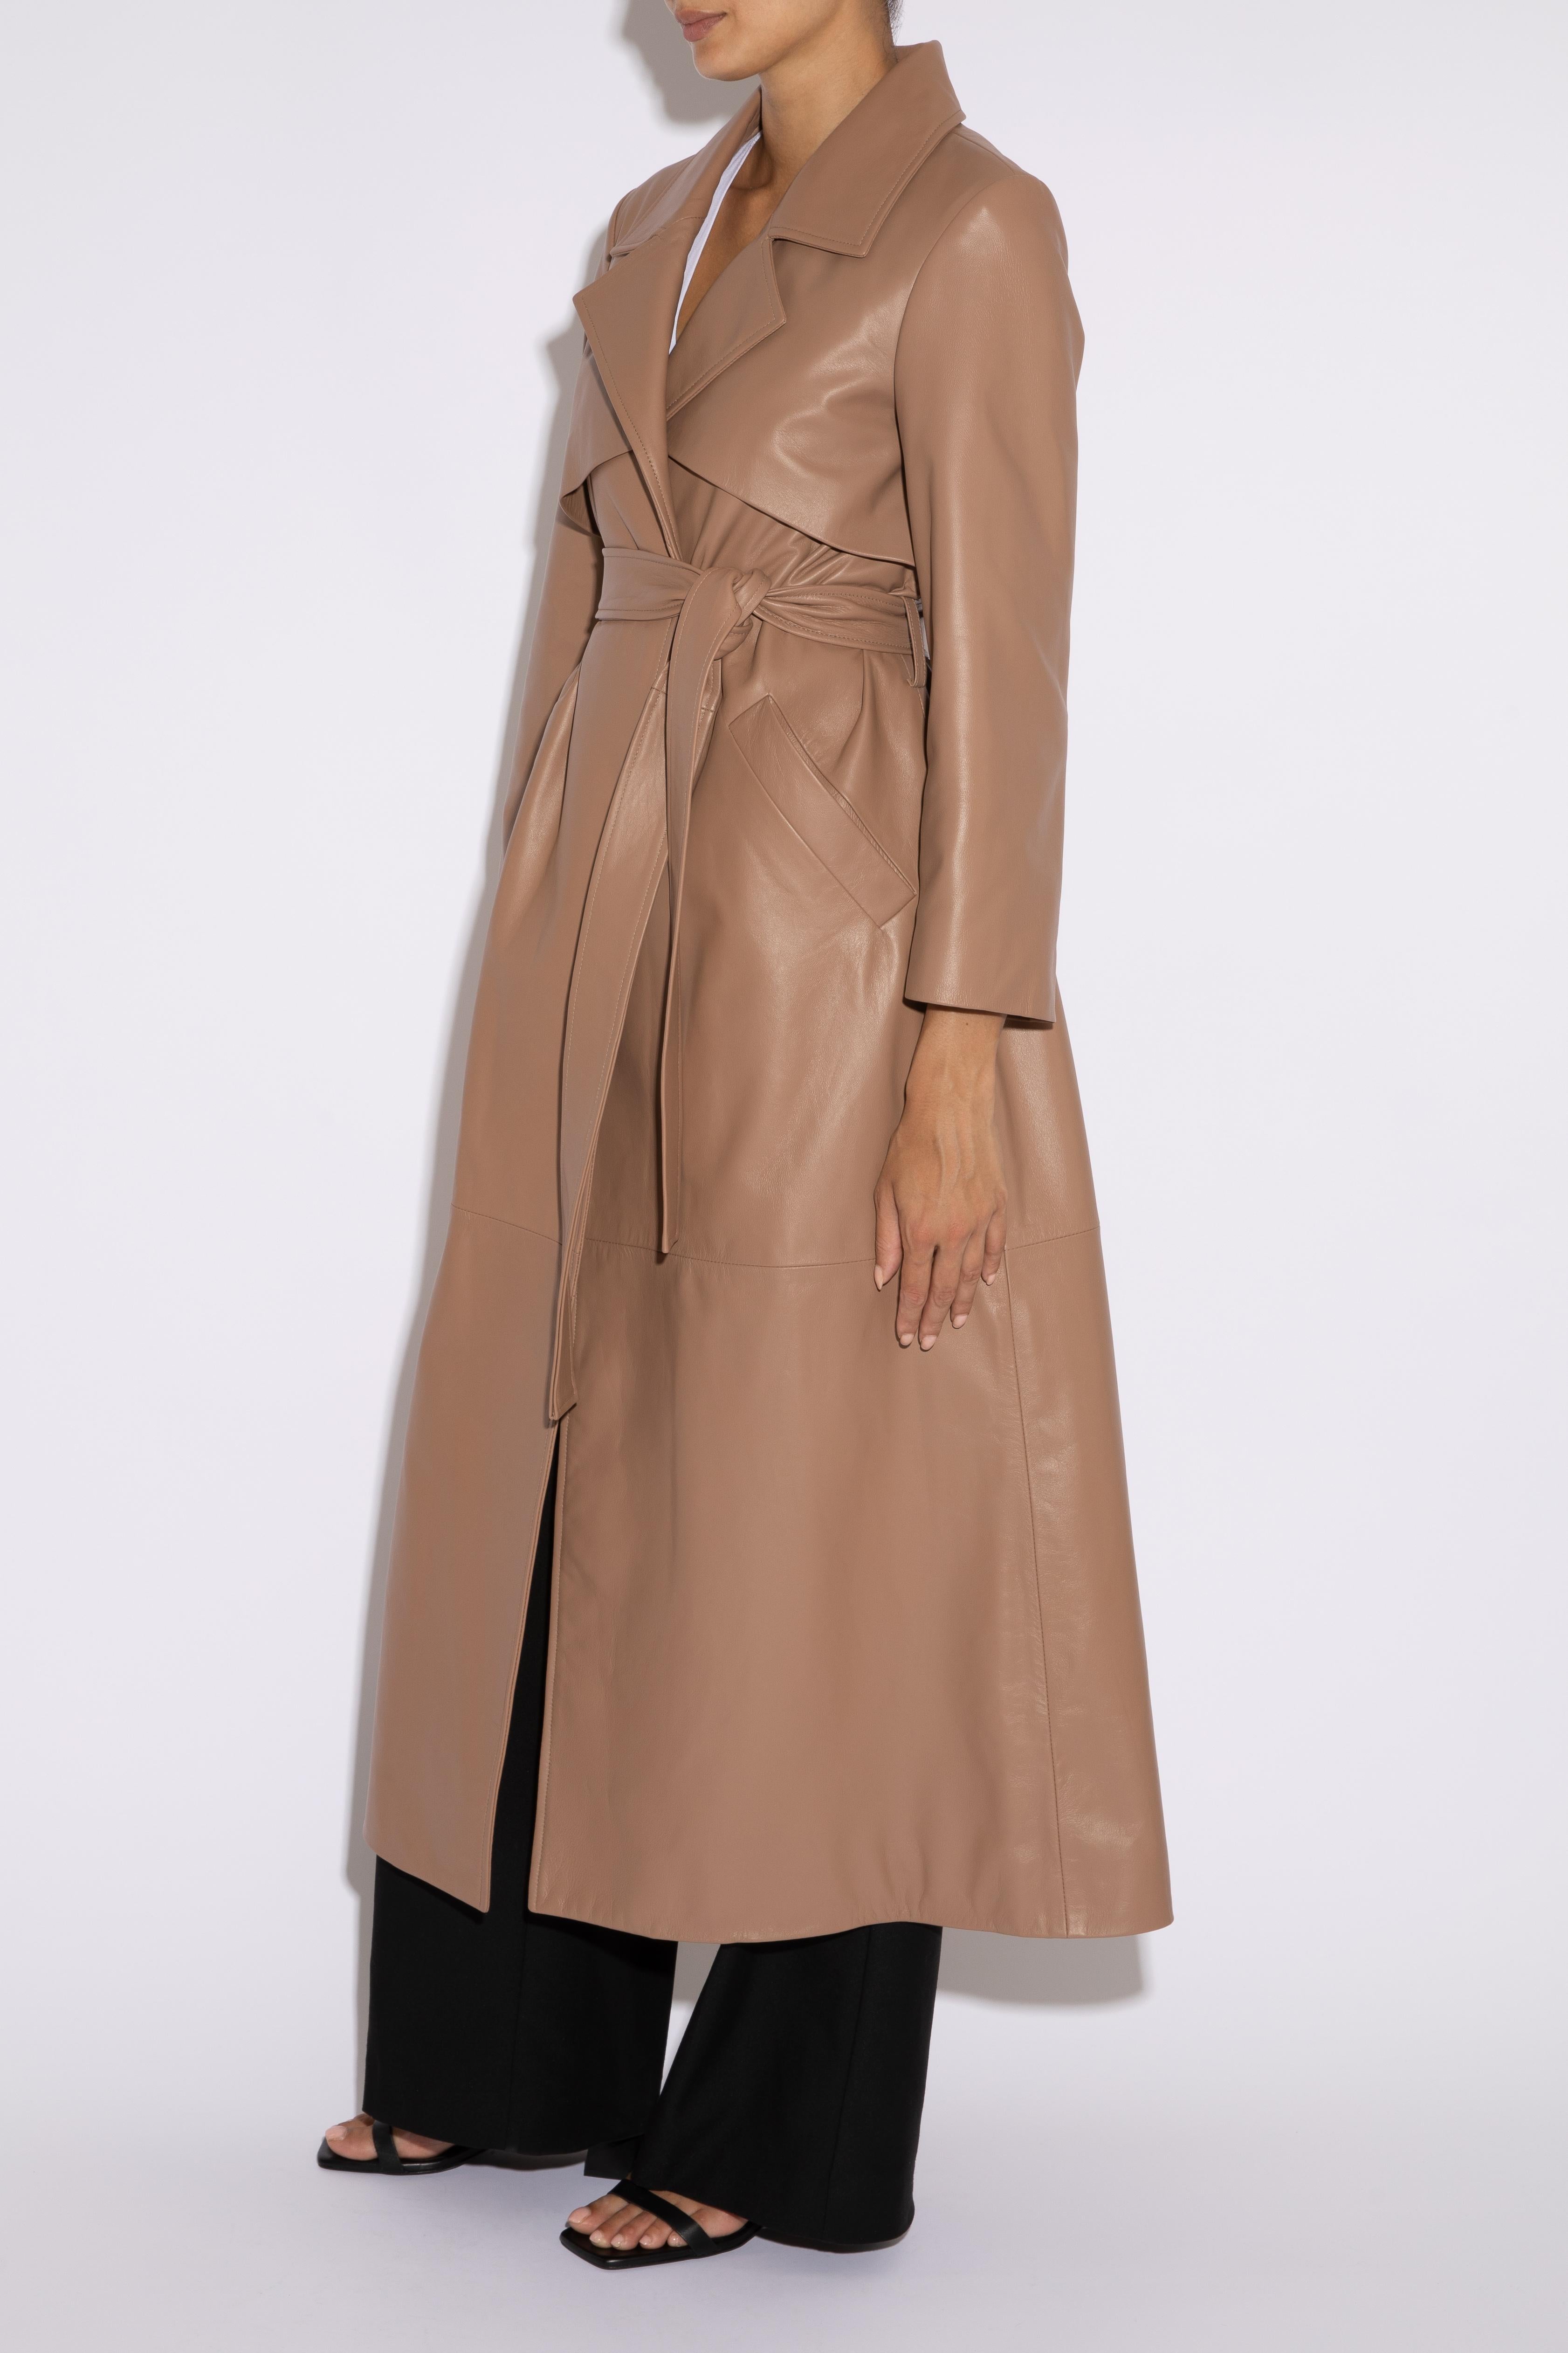 Verheyen London Leather Trench Coat in Taupe Brown - Size uk 12 For Sale 2